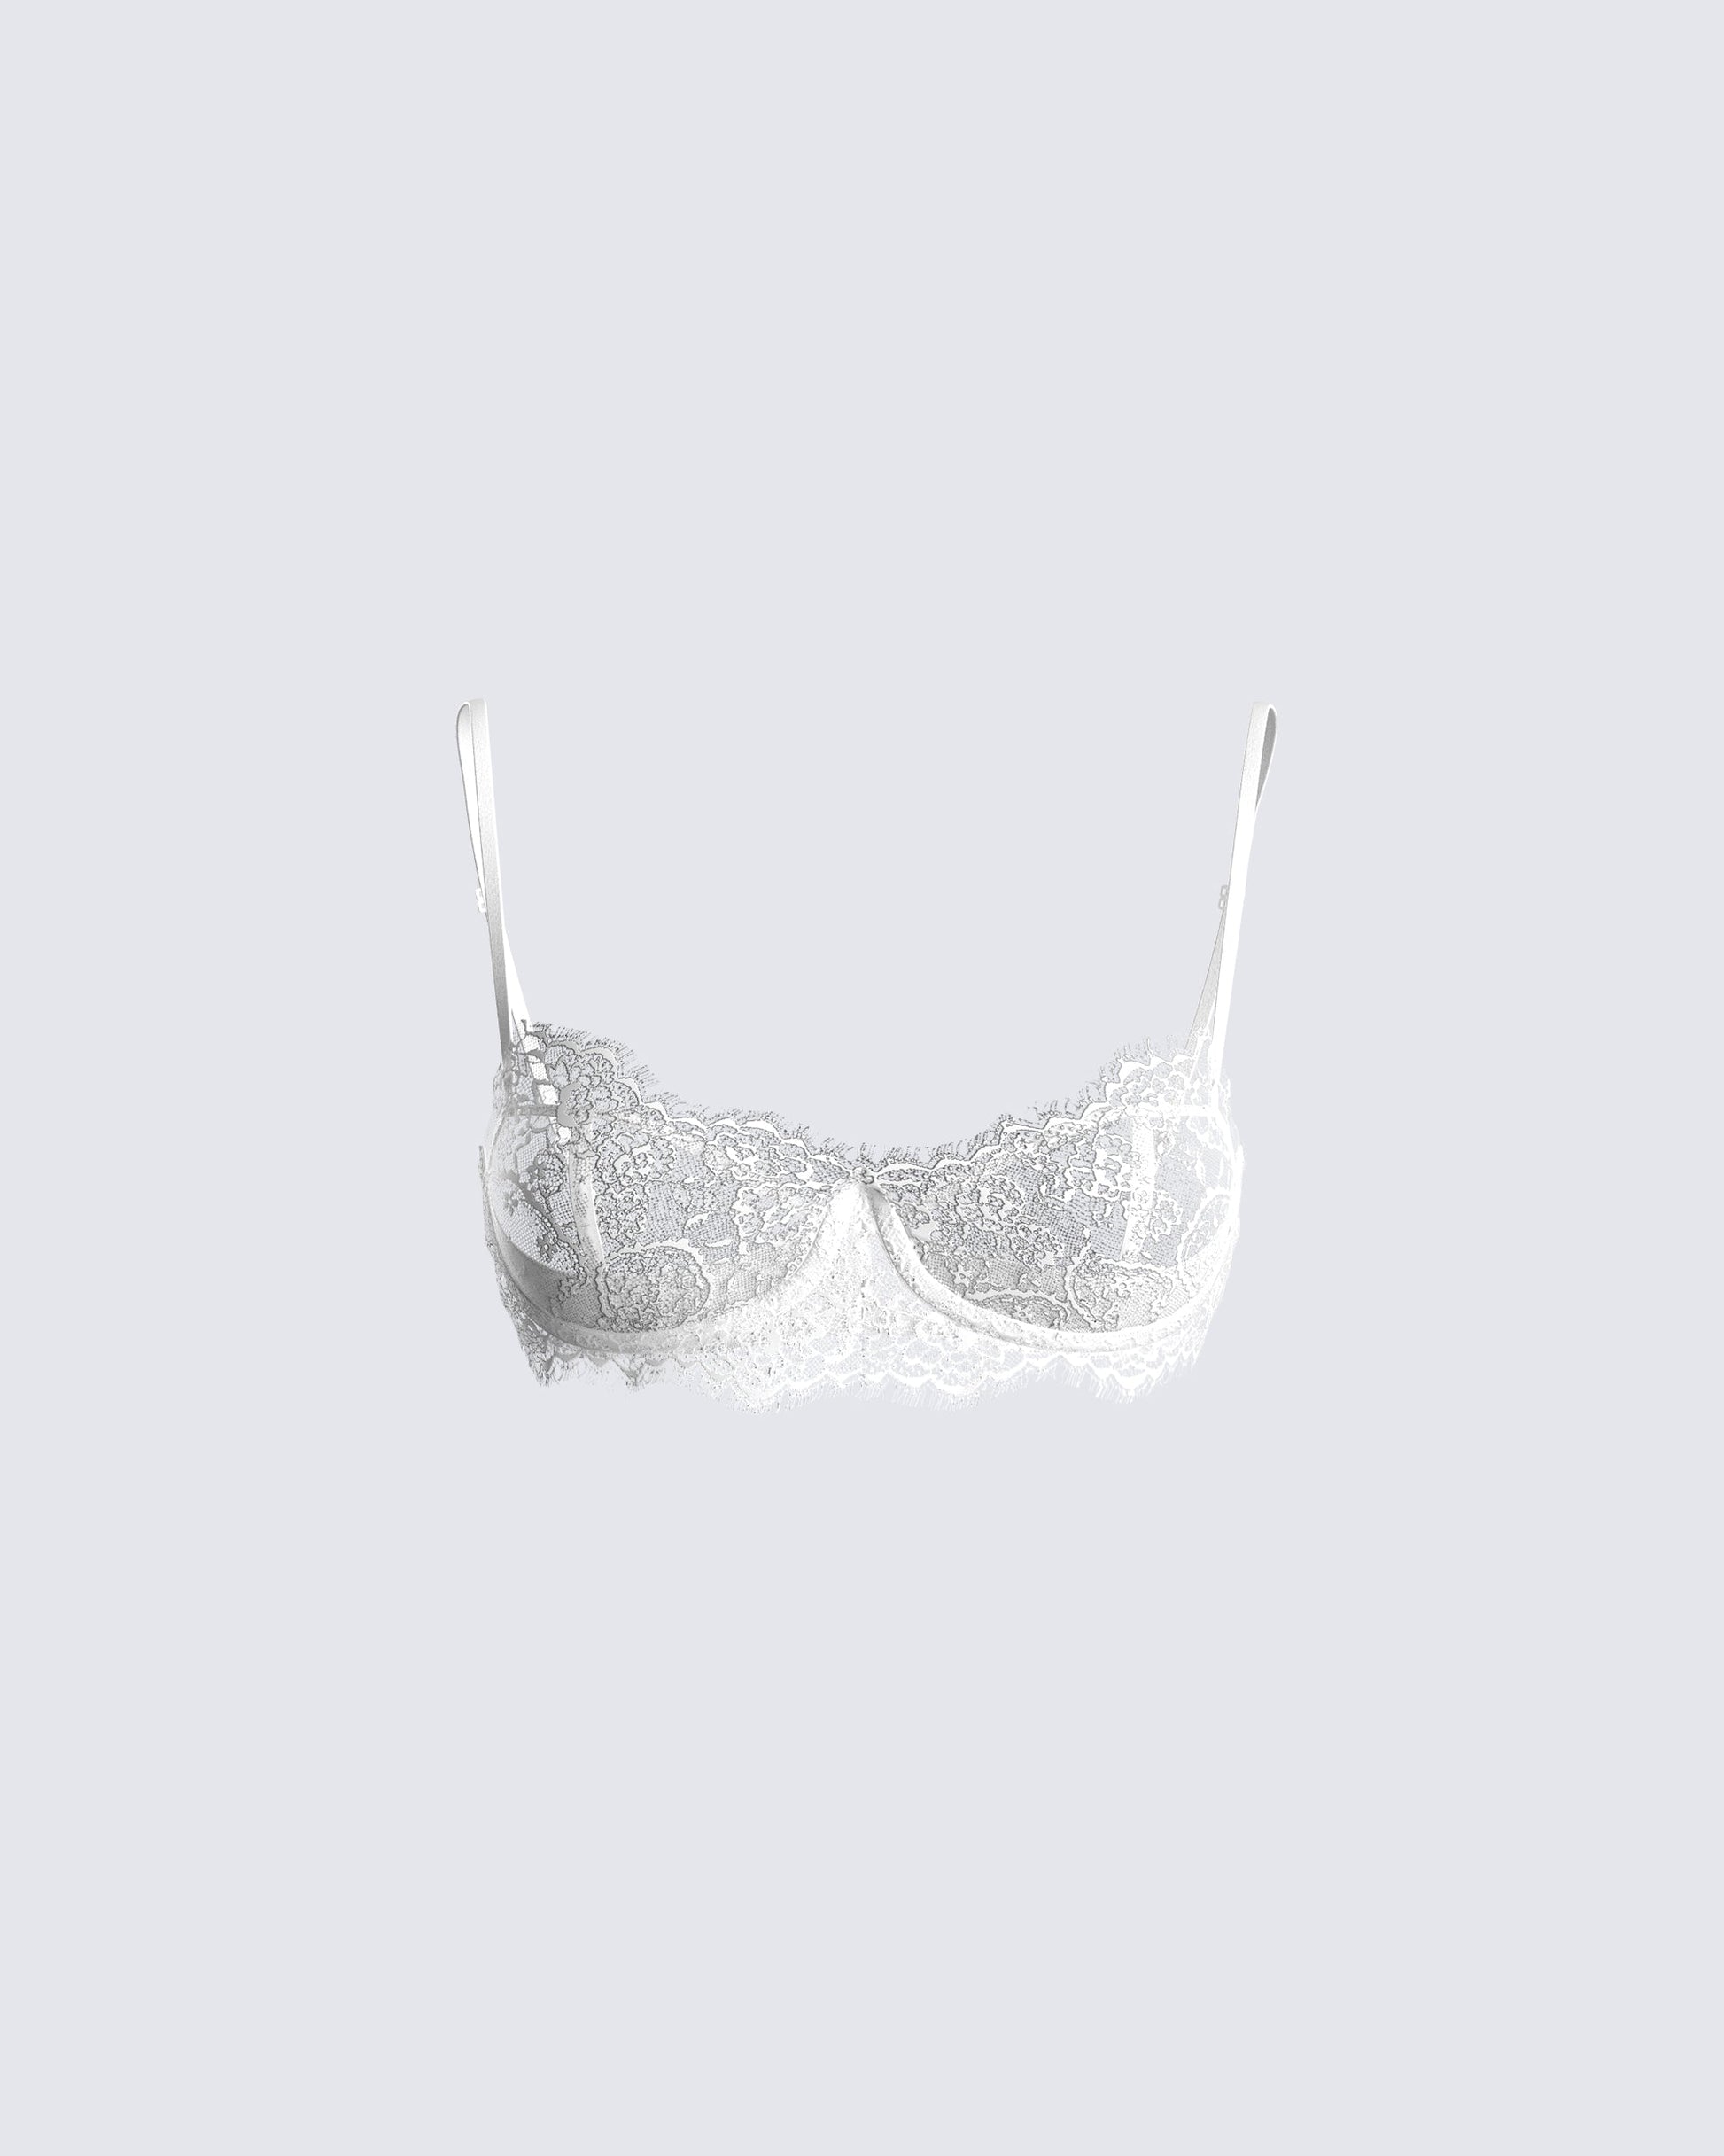 Sexy Bra Band Lace White Nude White With Or Without Straps Sensu